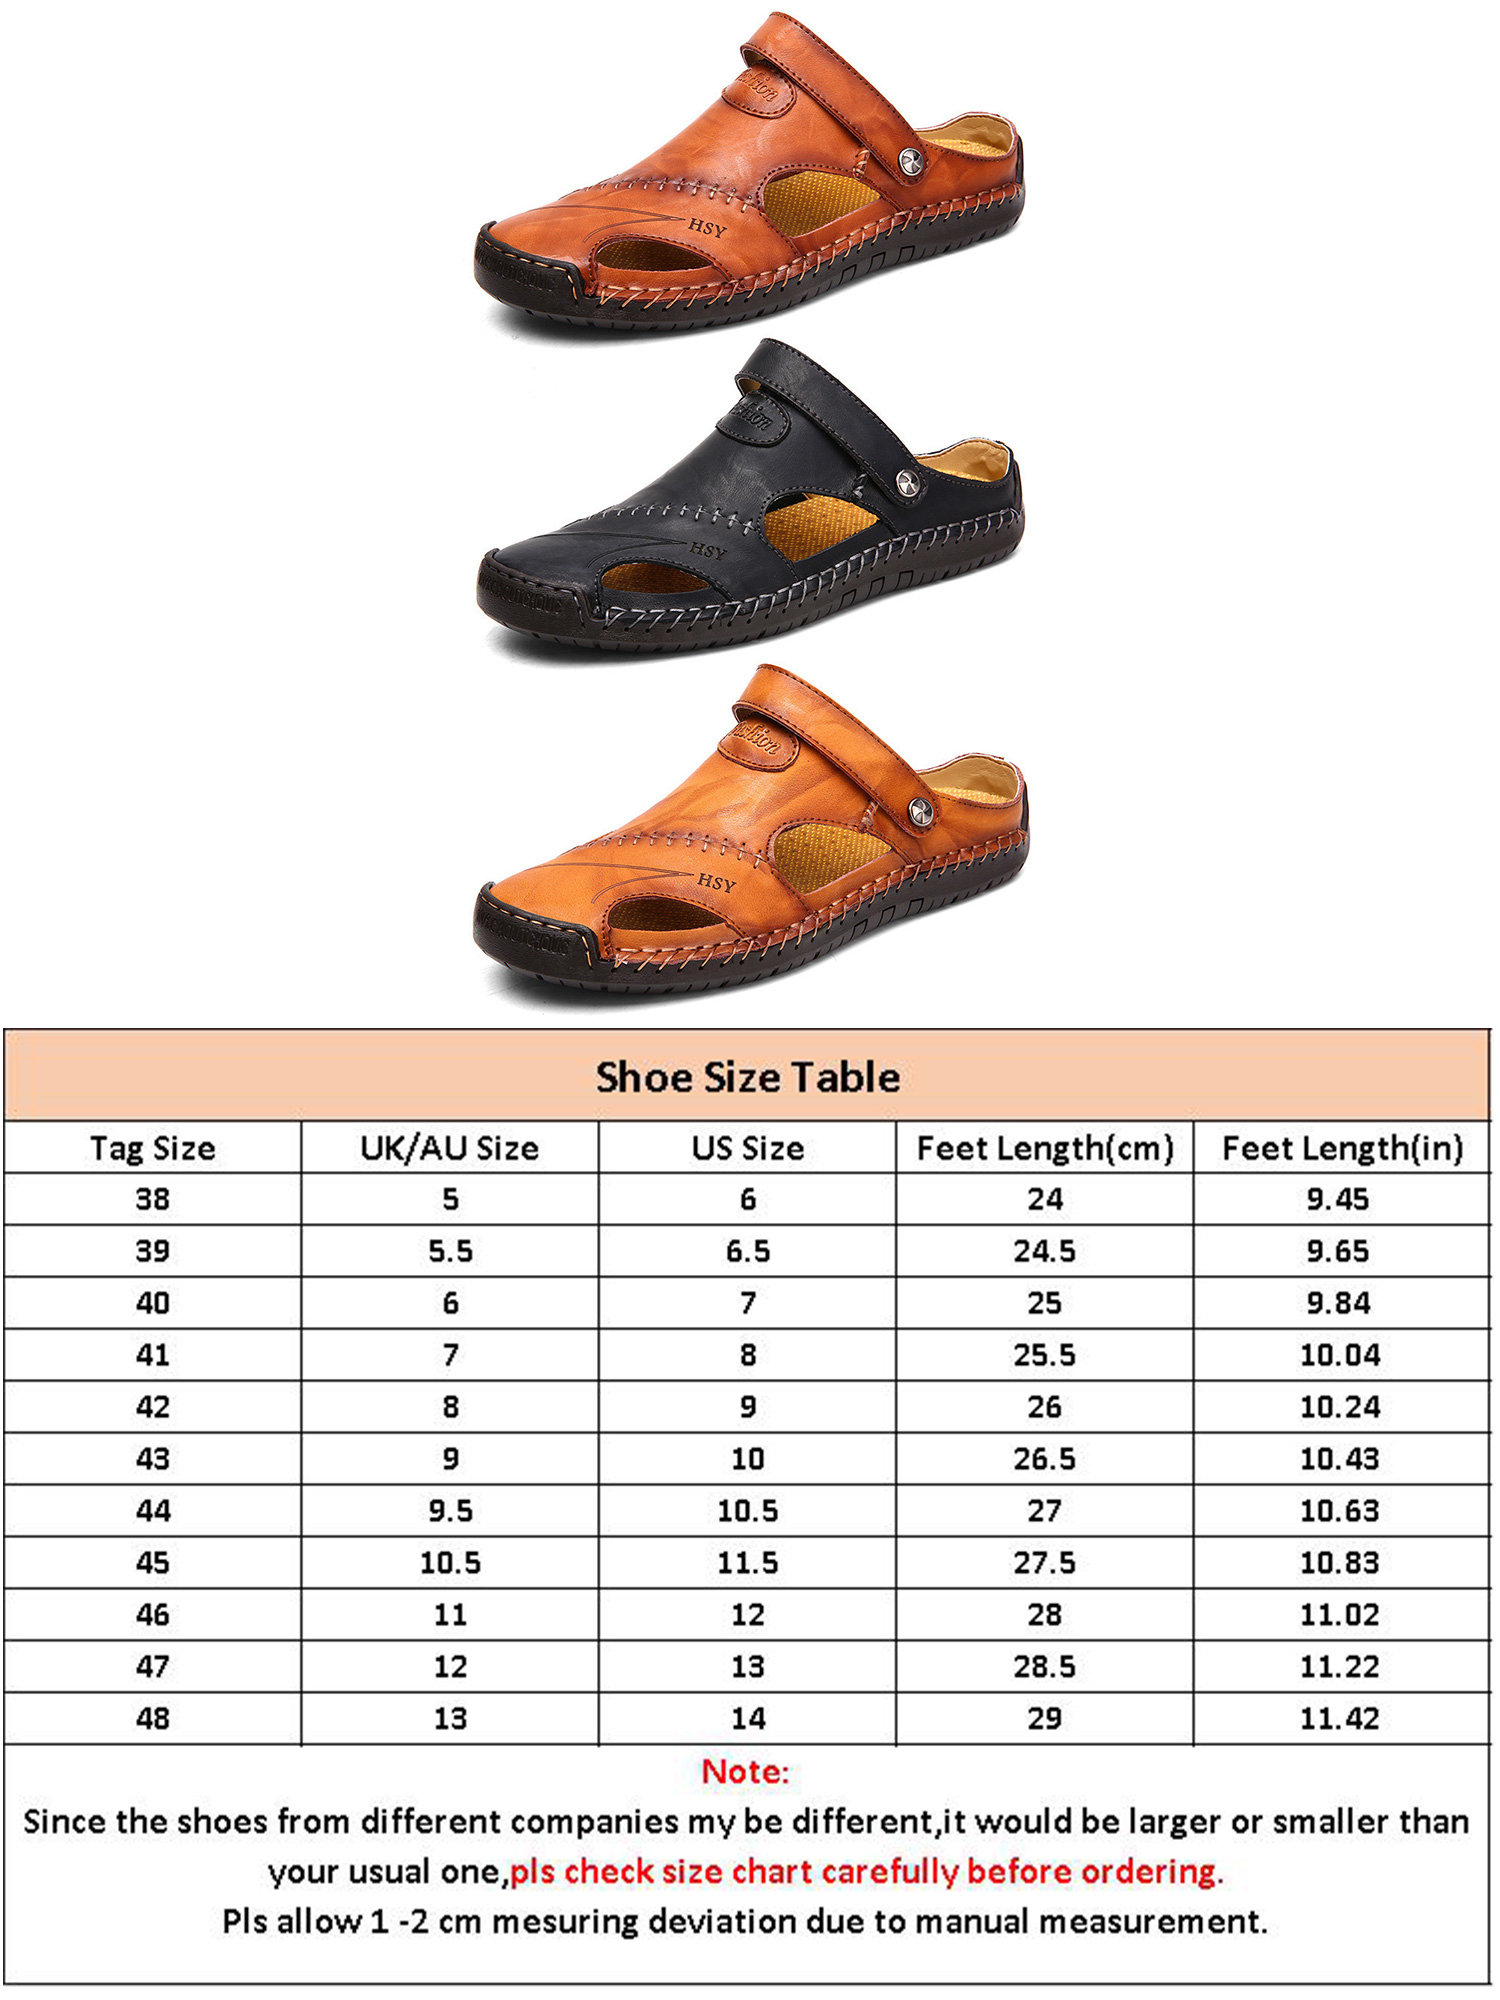 Wazshop Mens Closed Toe Casual Leather Strap Athletic Beach Outdoor Adjustable Sandals Fisherman Shoes - image 2 of 5